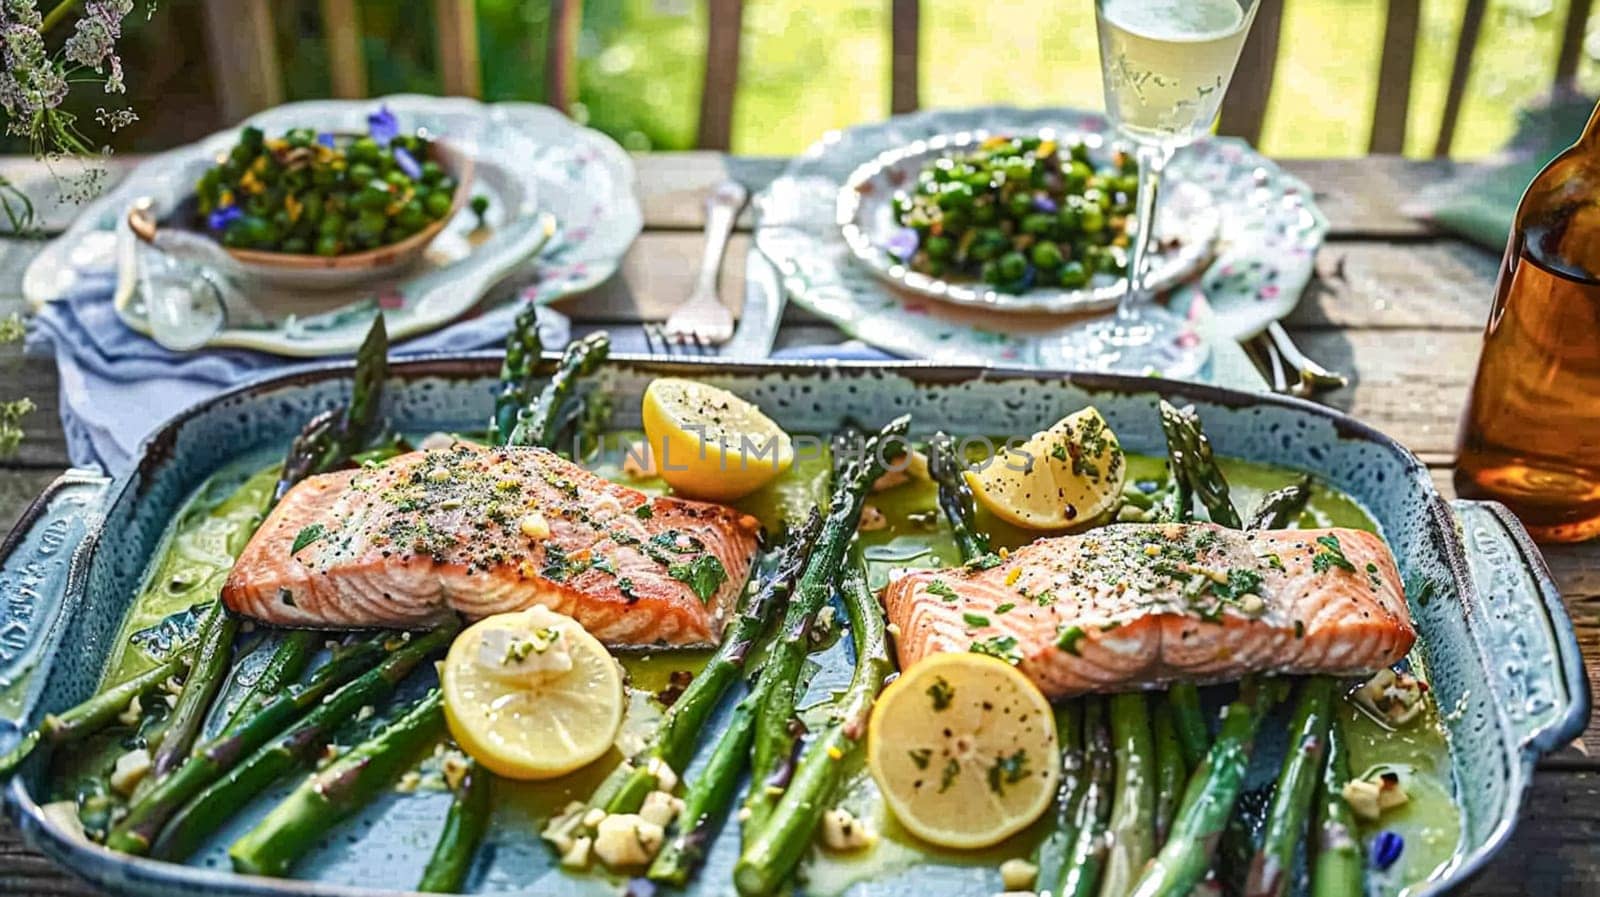 Salmon with asparagus, lemon and spice seasoning in the English countryside garden, homemade recipe